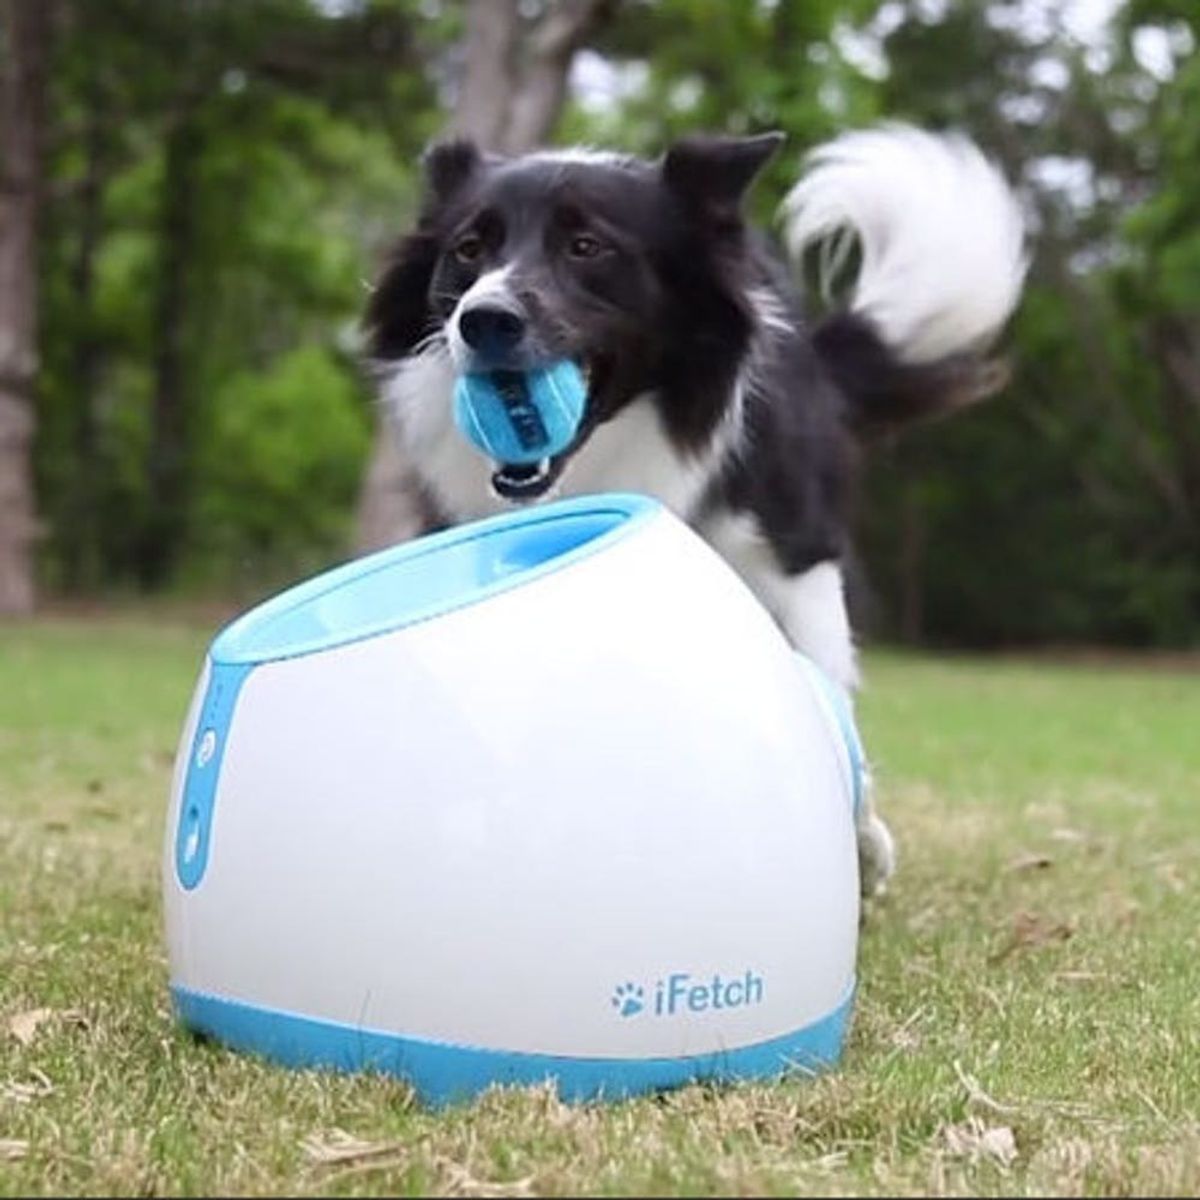 This Toy Plays Fetch With Your Dog When You’re Not at Home